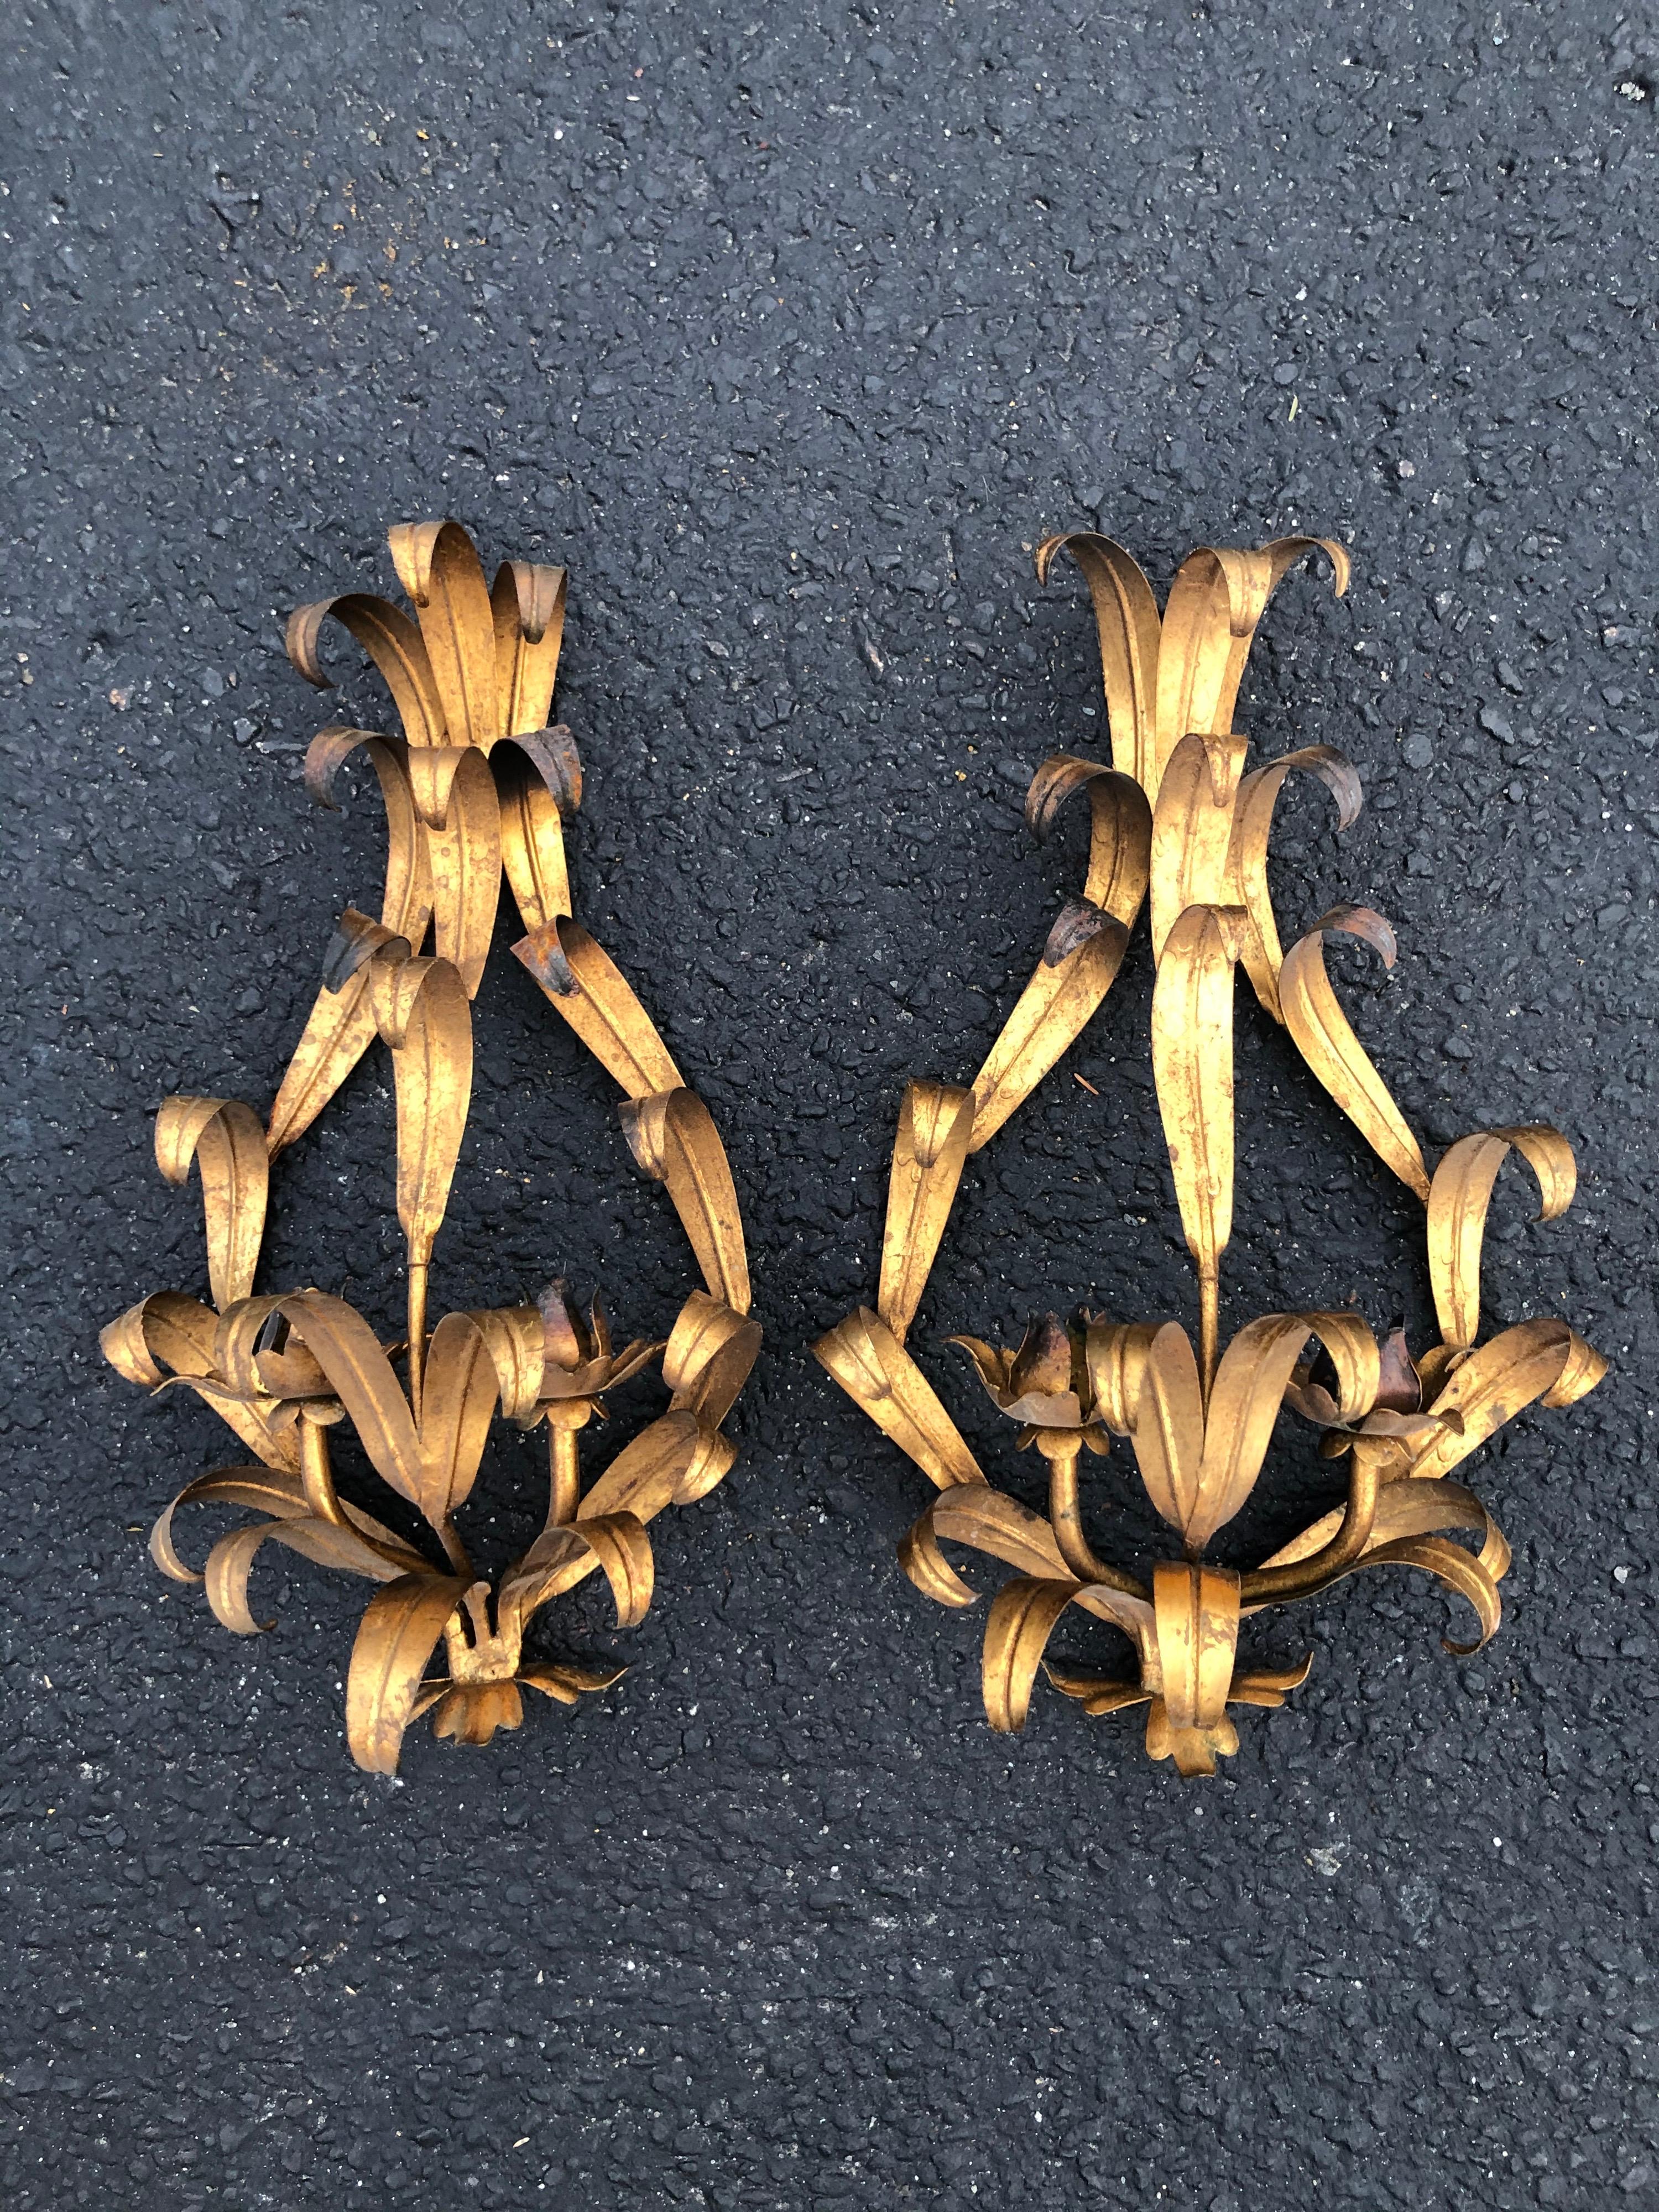 Pair of Italian gilt iron wall sconces. Romantic sculptural floral design which holds two candles each. Can also be wired for electricity. Perfect for a romantic bathroom or bedroom. Adorn on your wall flanking a hallway mirror or a mantle mirror.